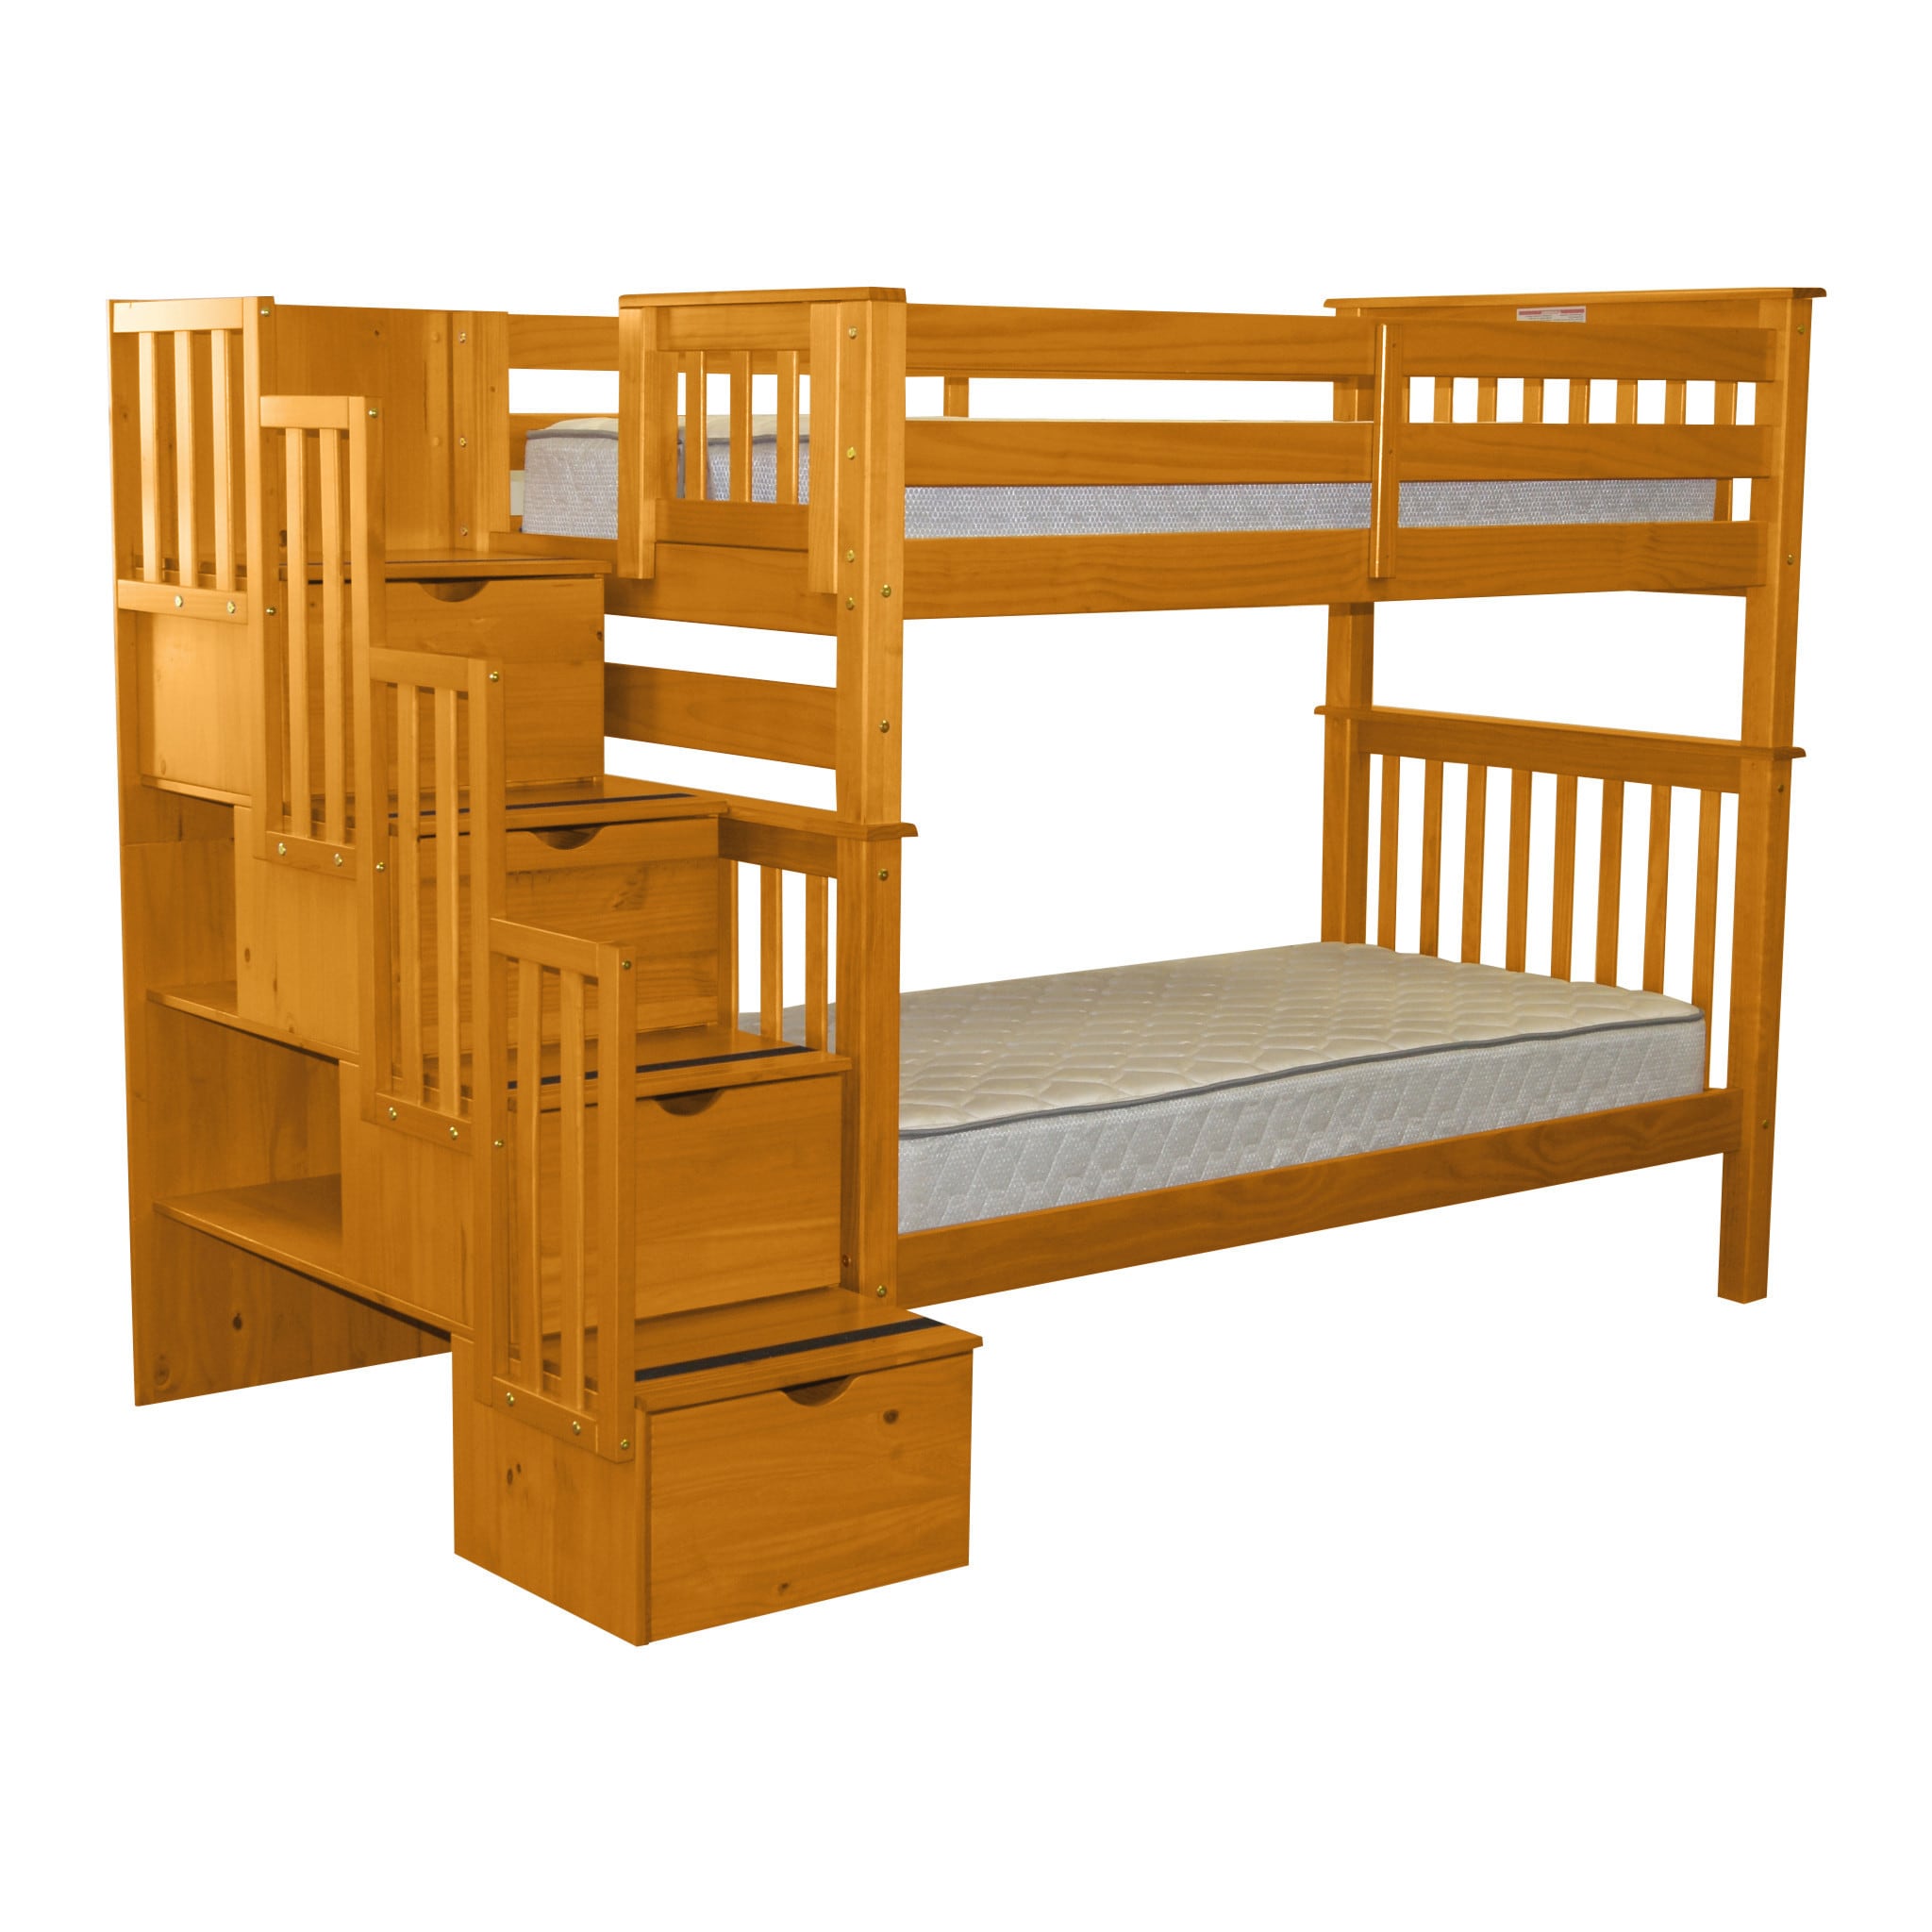 Shop Bedz King Bunk Beds Tall Twin Over Twin Stairway With 4 Step